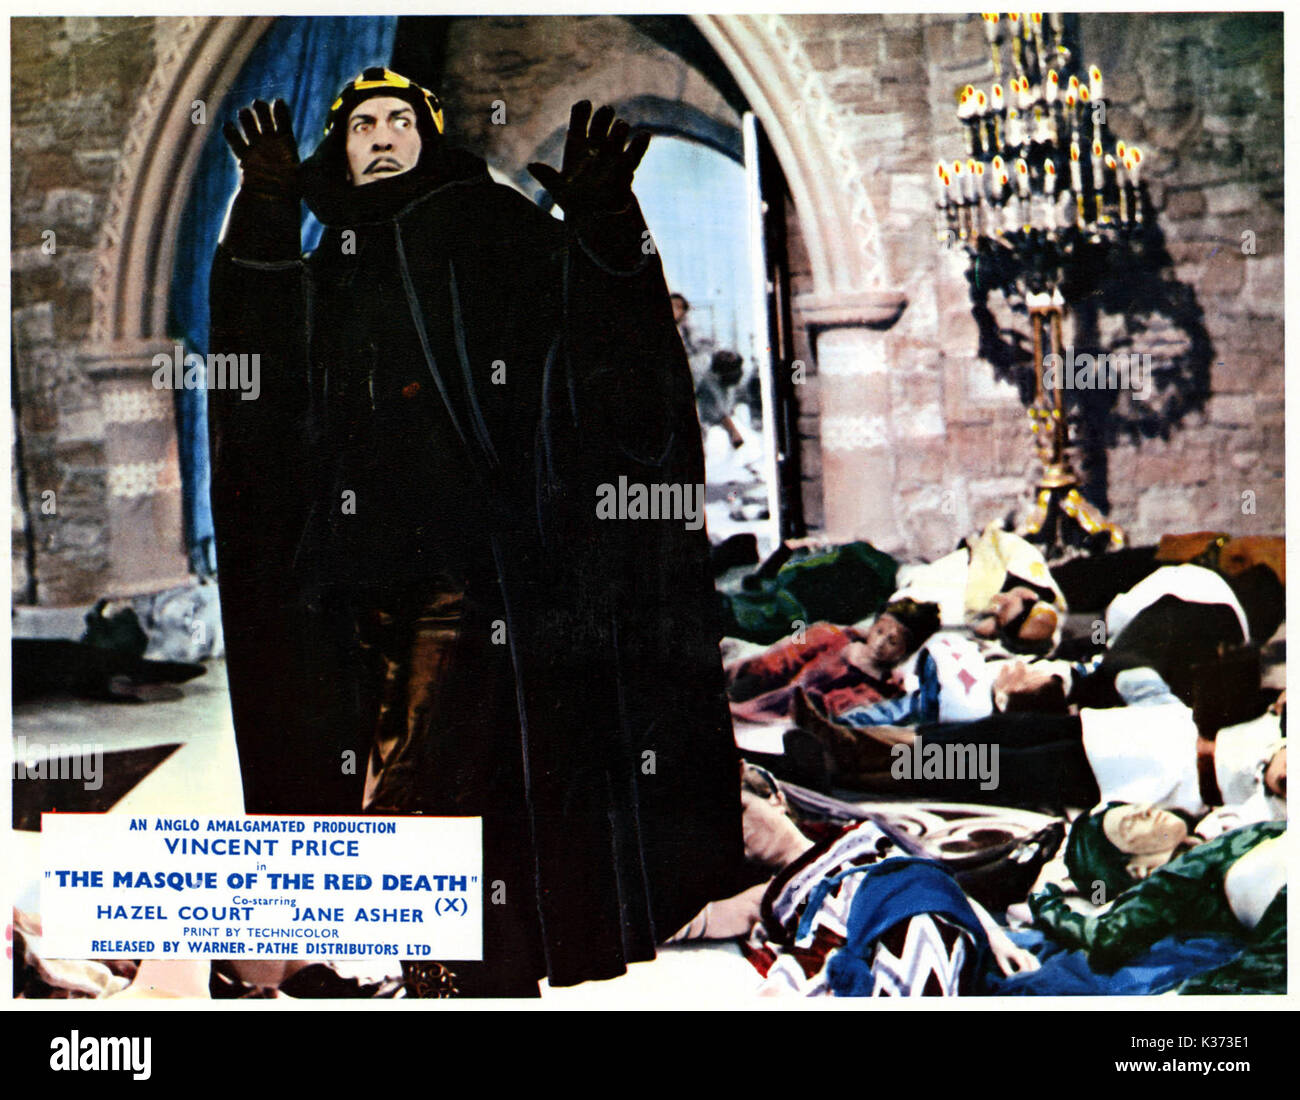 THE MASQUE OF THE RED DEATH VINCENT PRICE     Date: 1964 Stock Photo